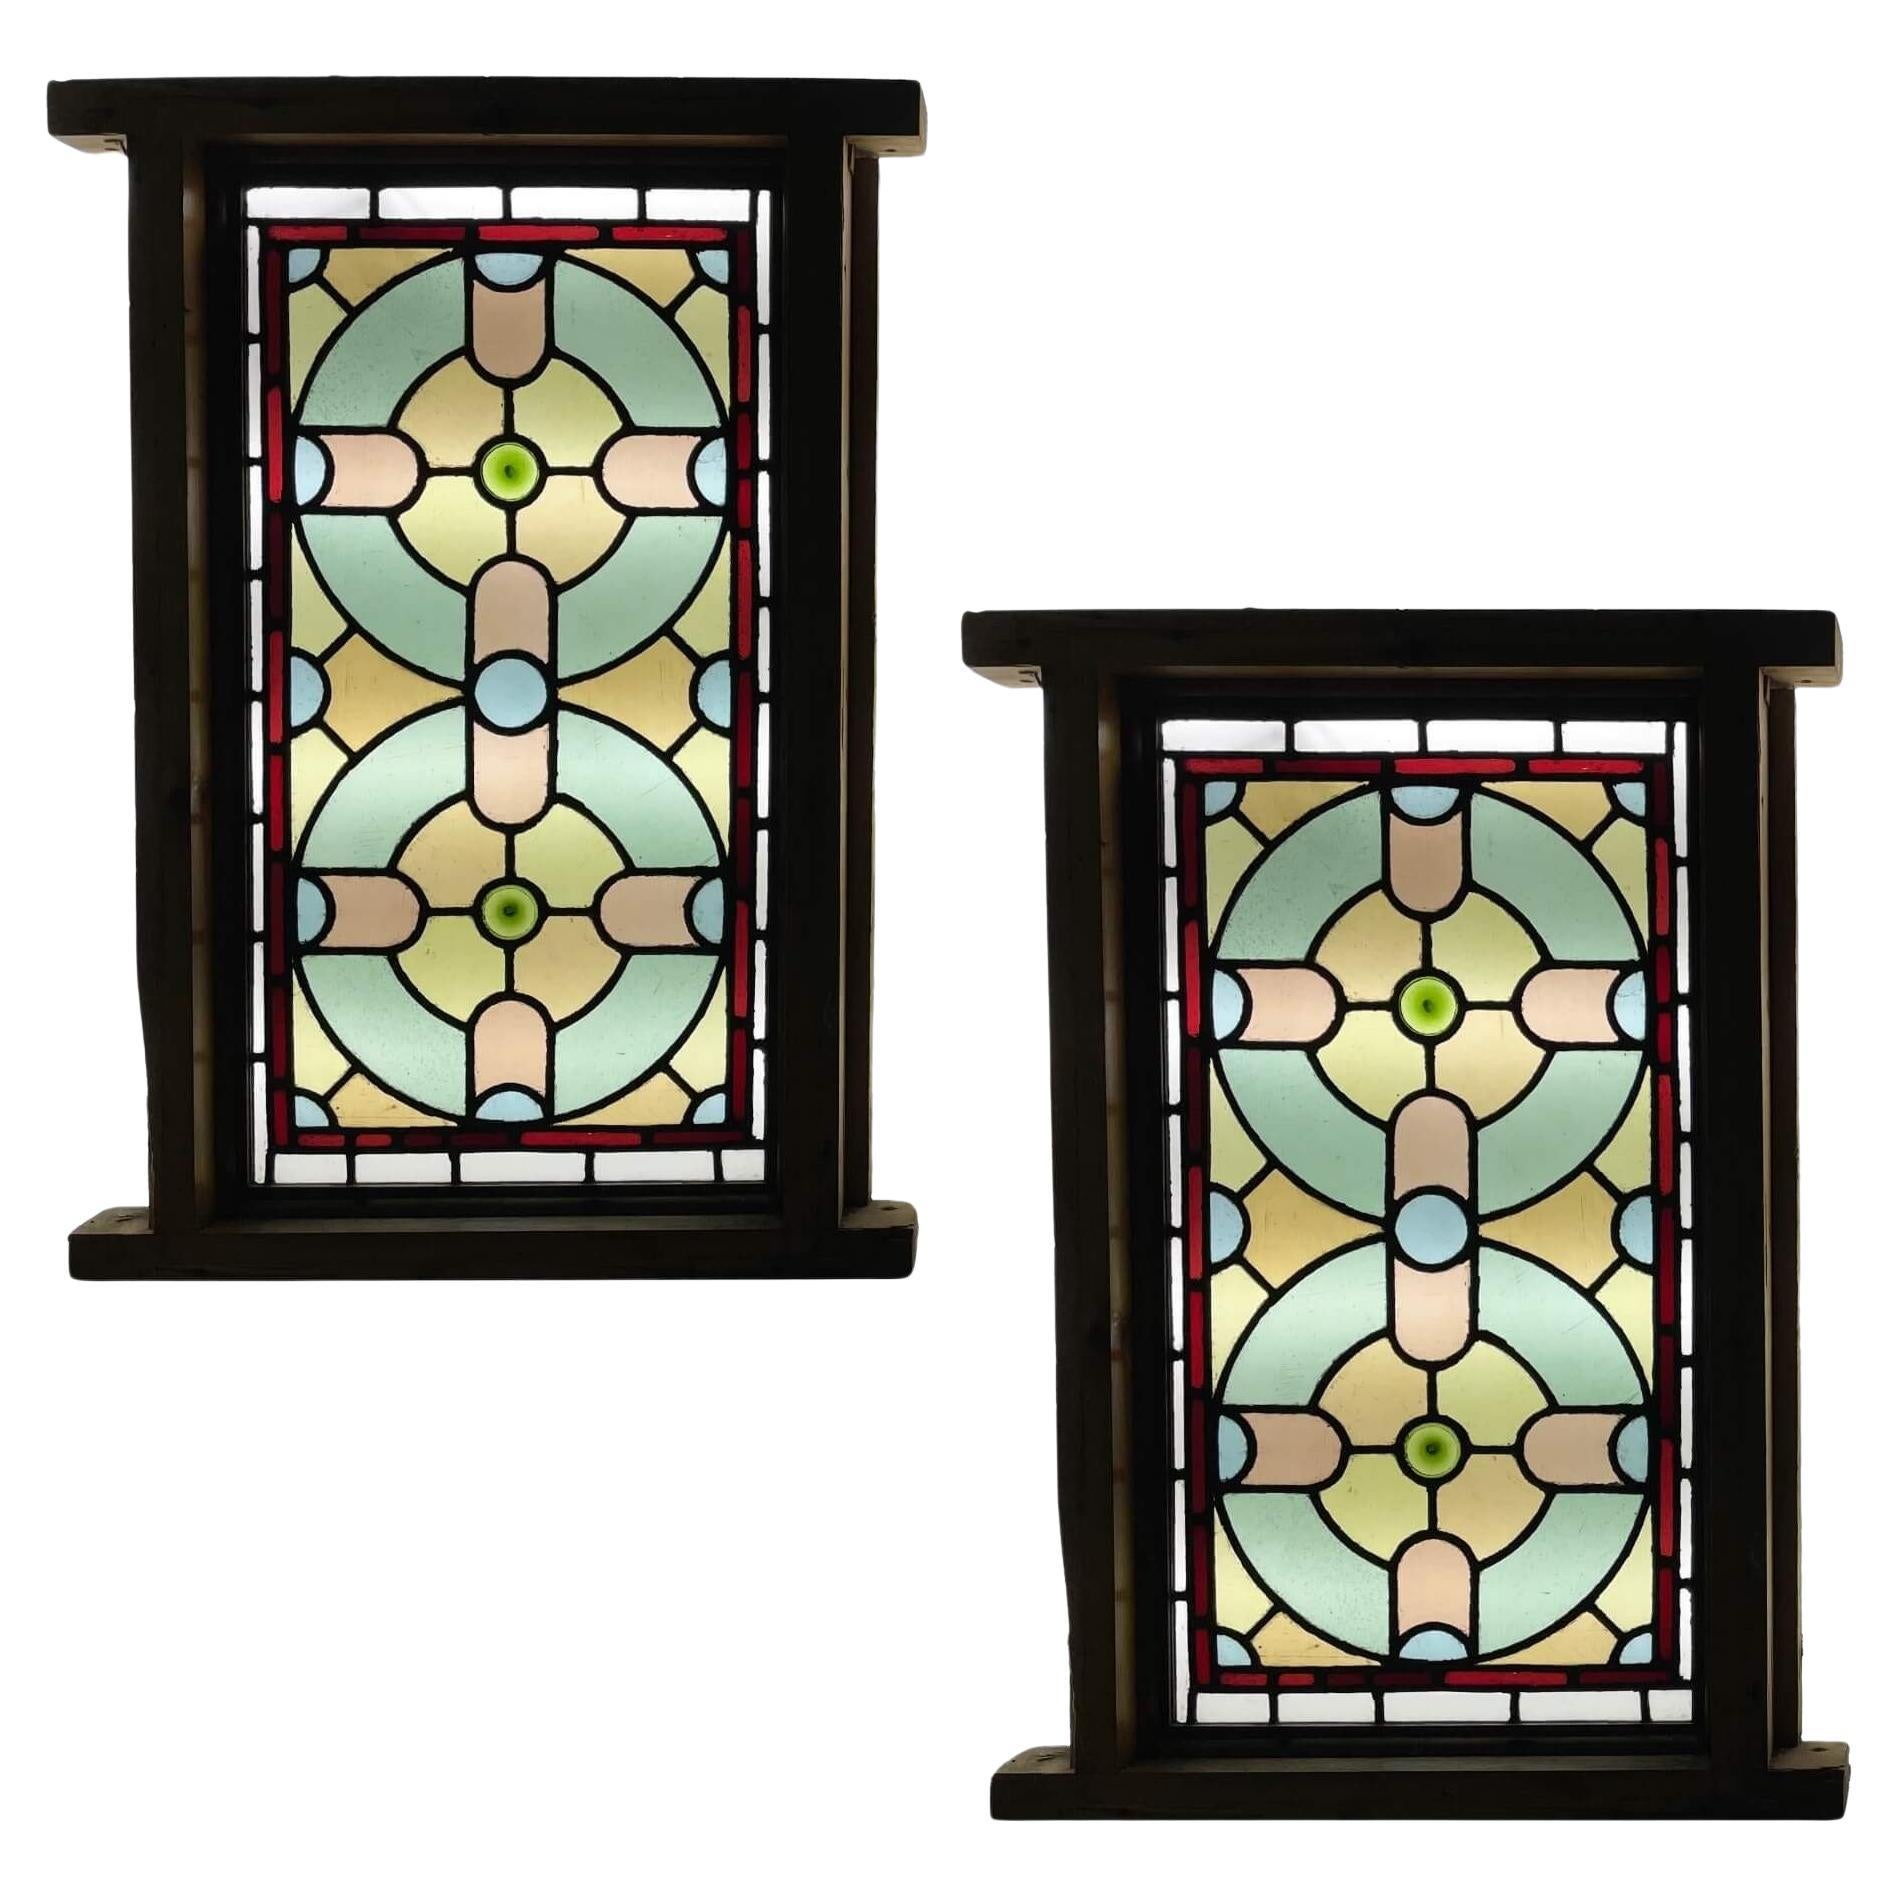 Pair of Victorian Stained Glass Window Panels